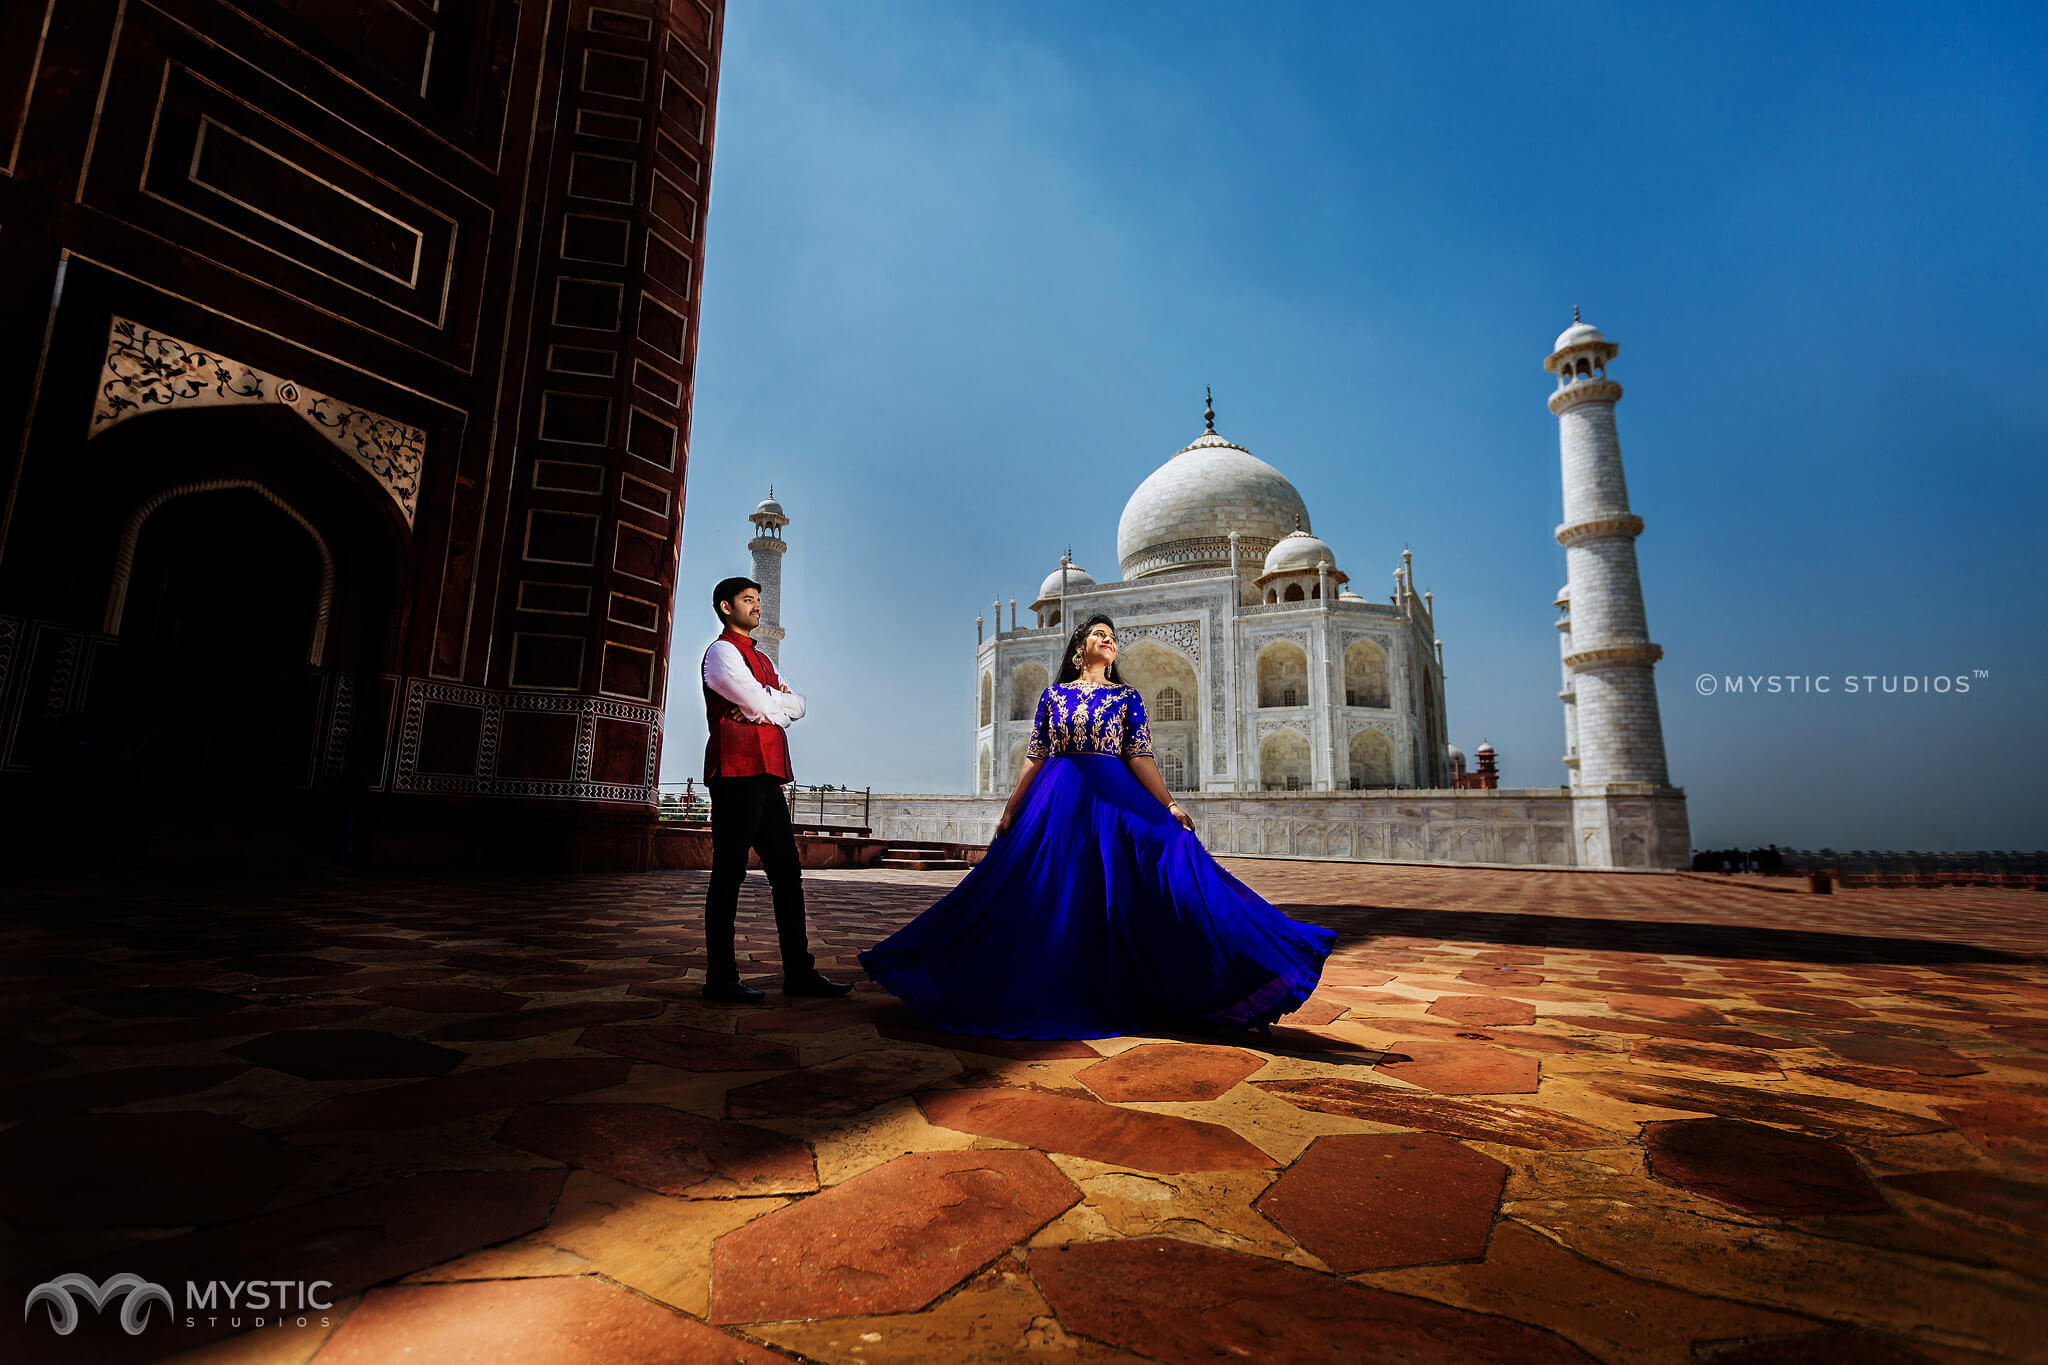 Couples Barred From Clicking Lovey Dovey Poses At Taj Mahal As It Reopens  With Renewed Guidelines